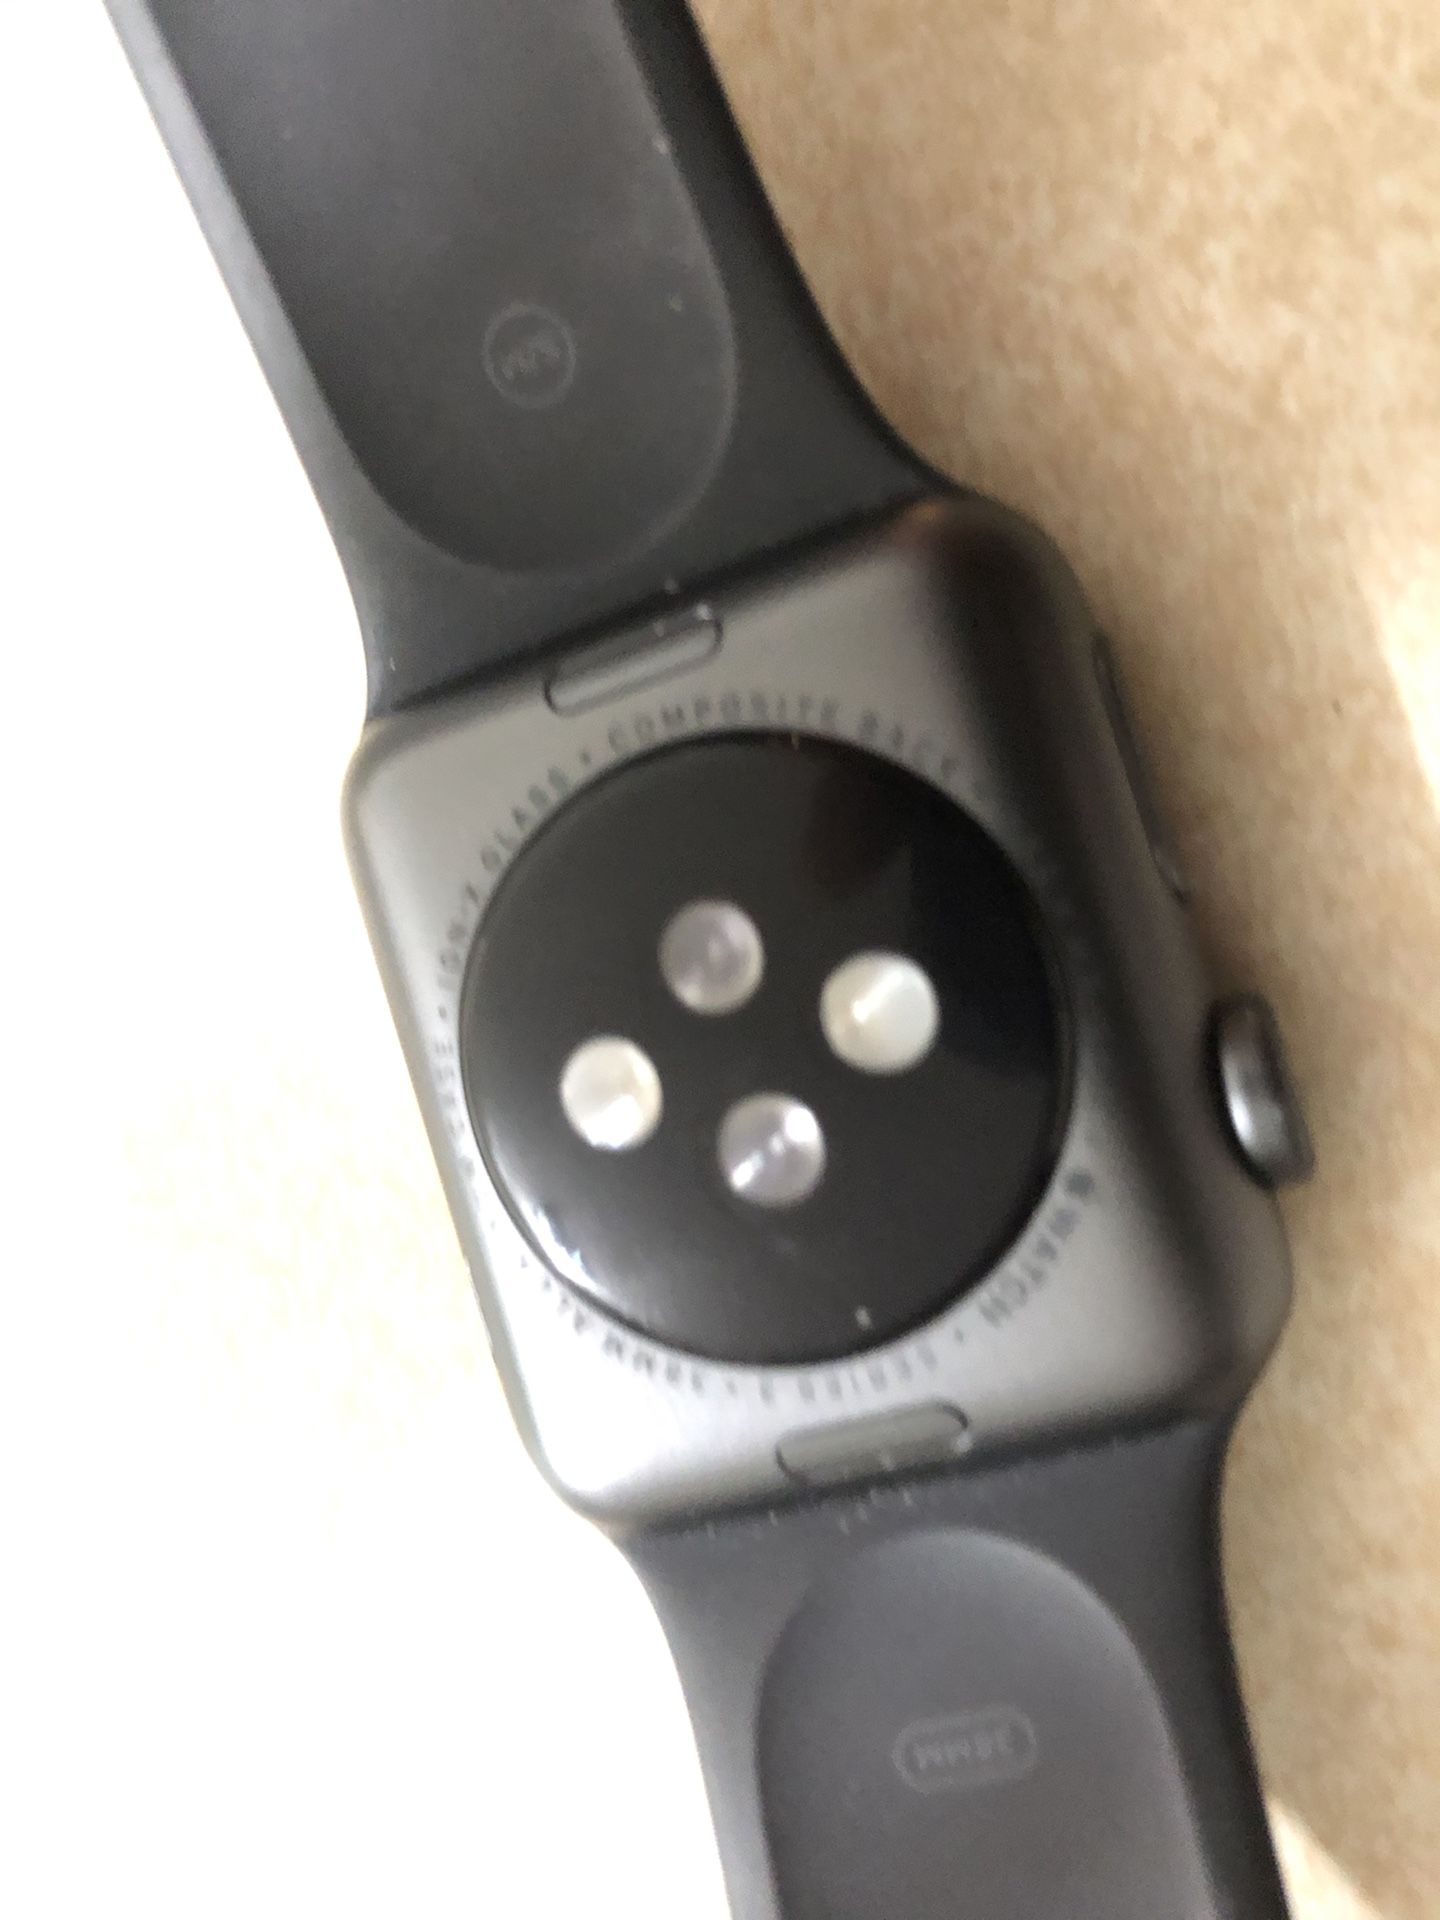 Apple Watch series 3 no charger iCloud locked